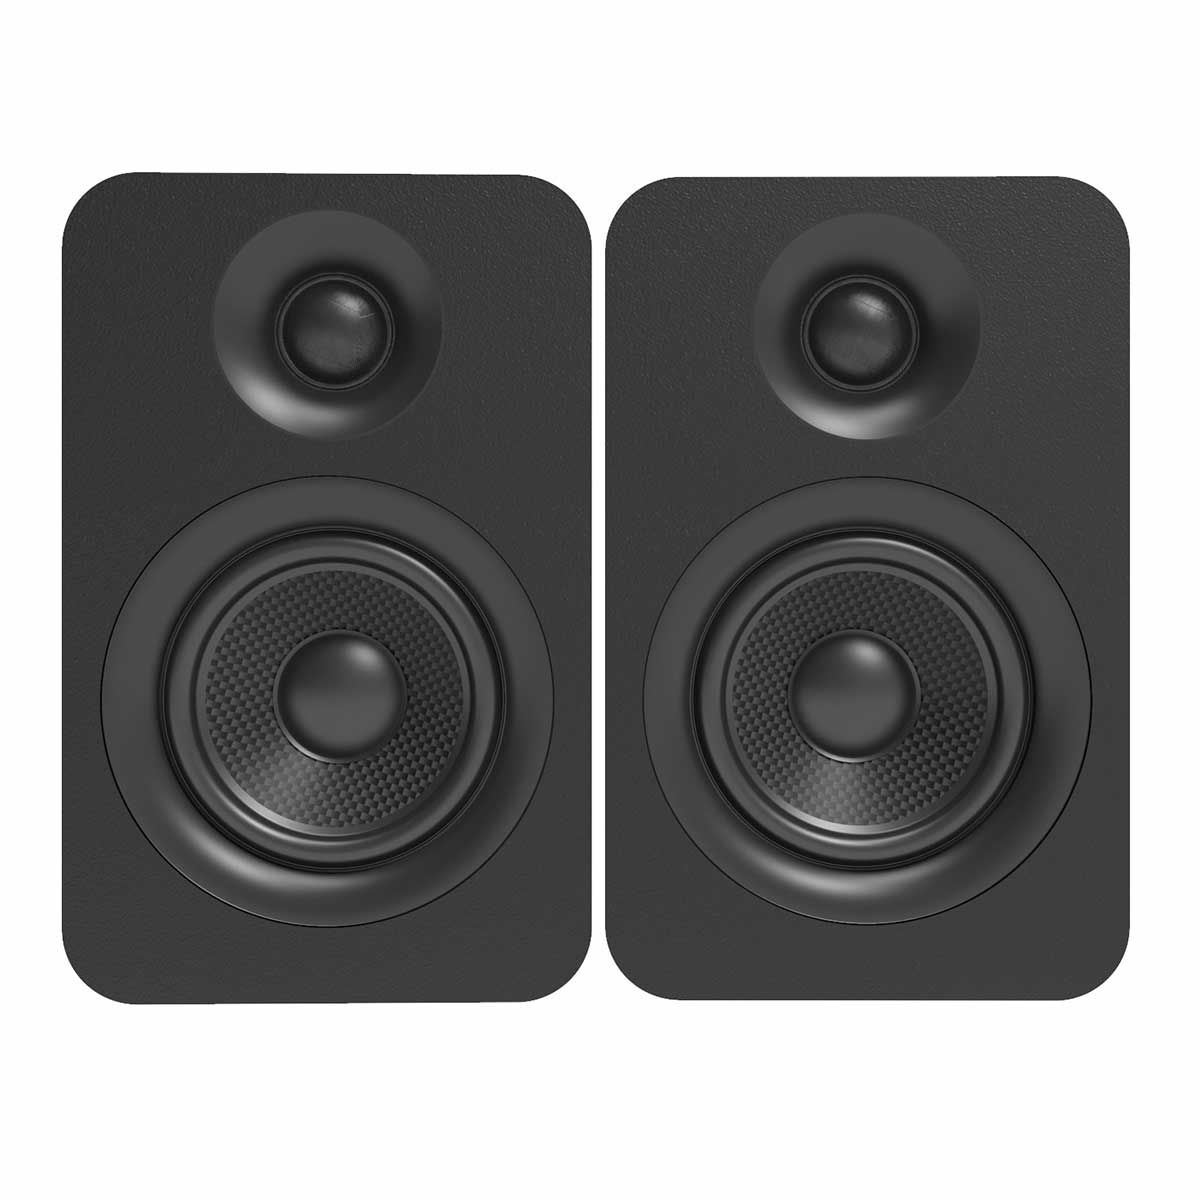 Matte White Pair Kanto YU Passive 4 Passive Bookshelf Speakers with 1 Silk Dome Tweeter External Amplifier Required 